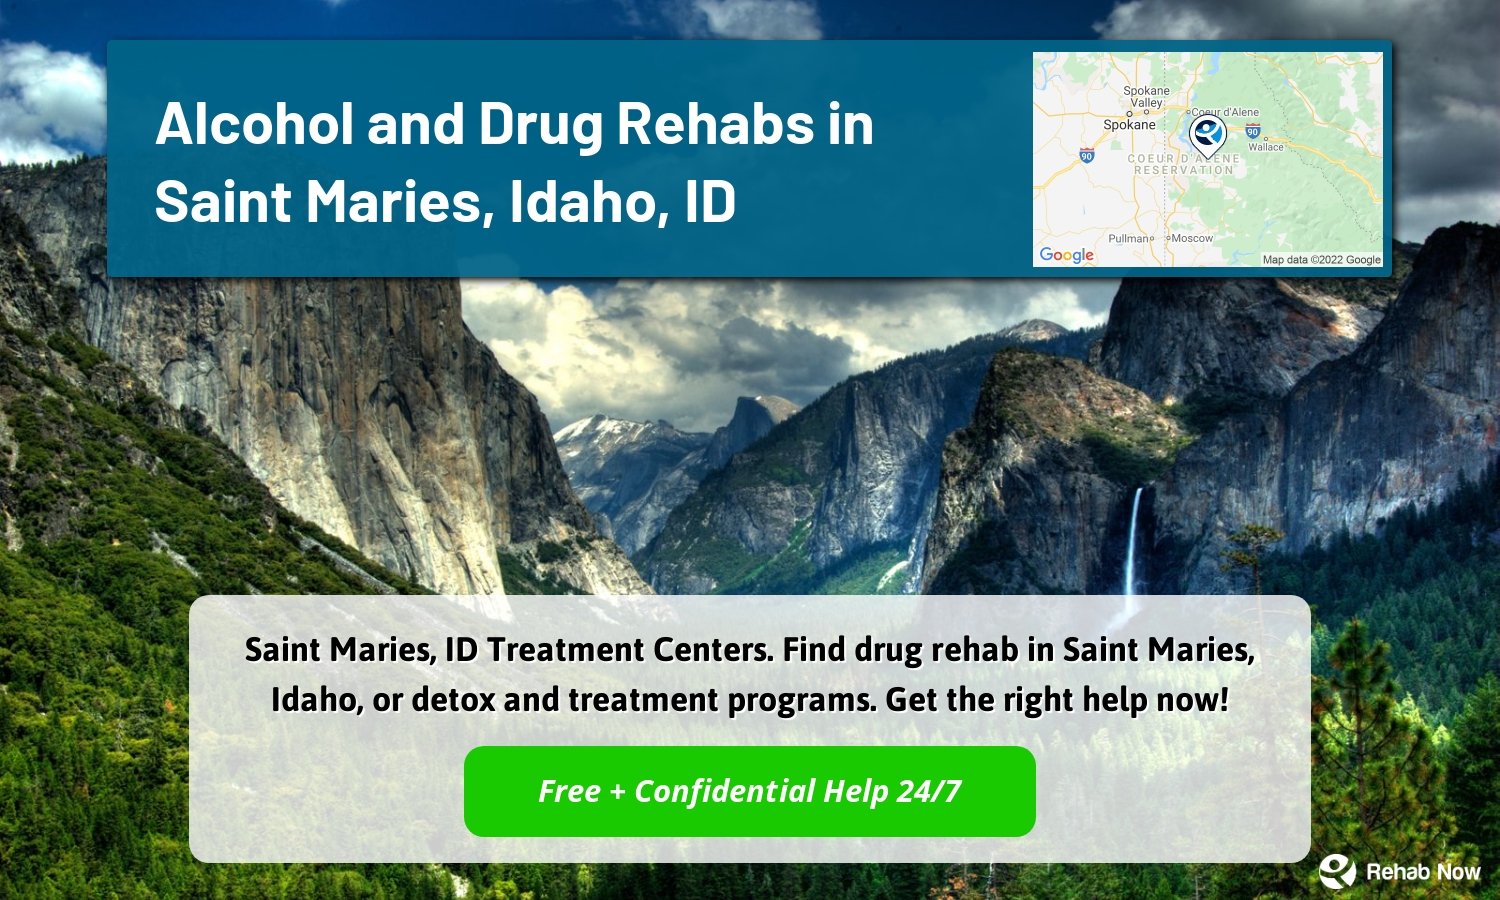 Saint Maries, ID Treatment Centers. Find drug rehab in Saint Maries, Idaho, or detox and treatment programs. Get the right help now!